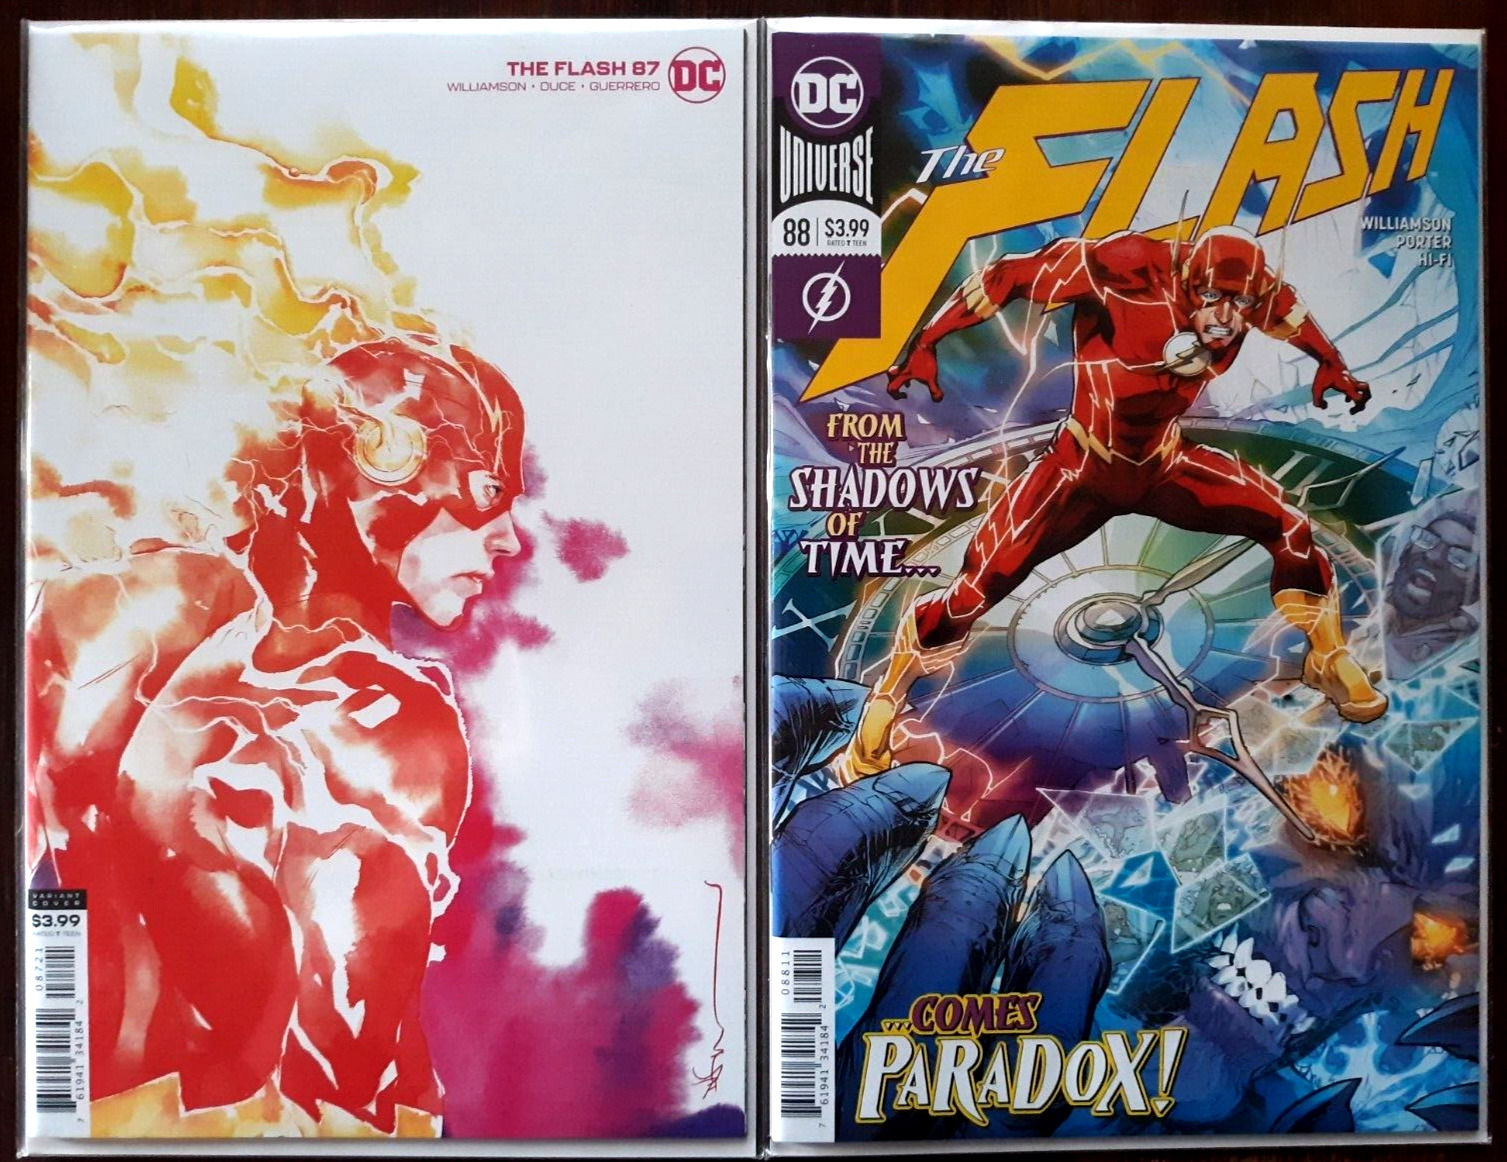 THE FLASH #87 and #88 (2020 DC) 1ST APPEARANCE OF PARADOX *FREE SHIPPING*